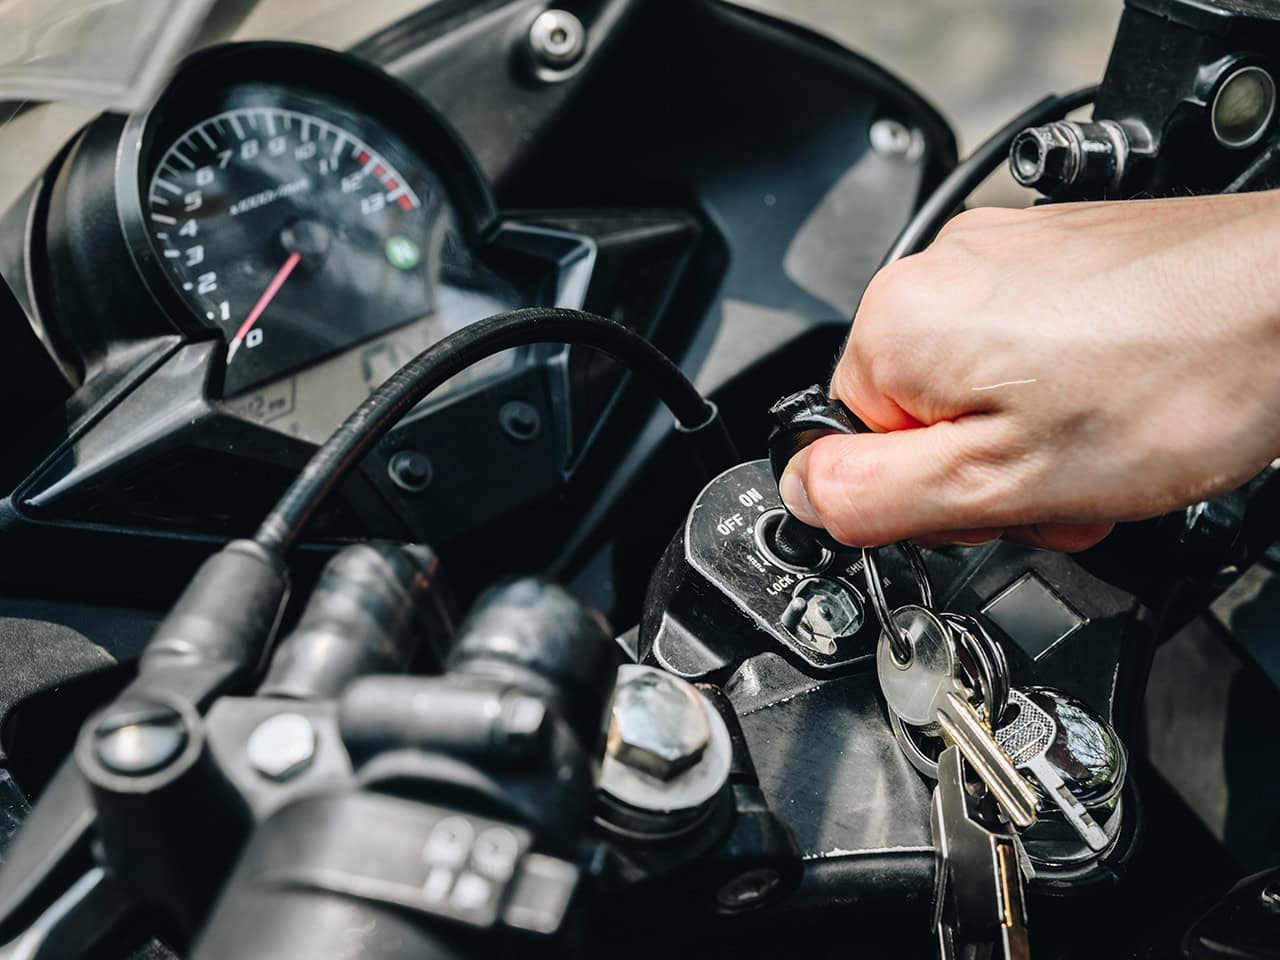 Man turning on a motorcycle with a key